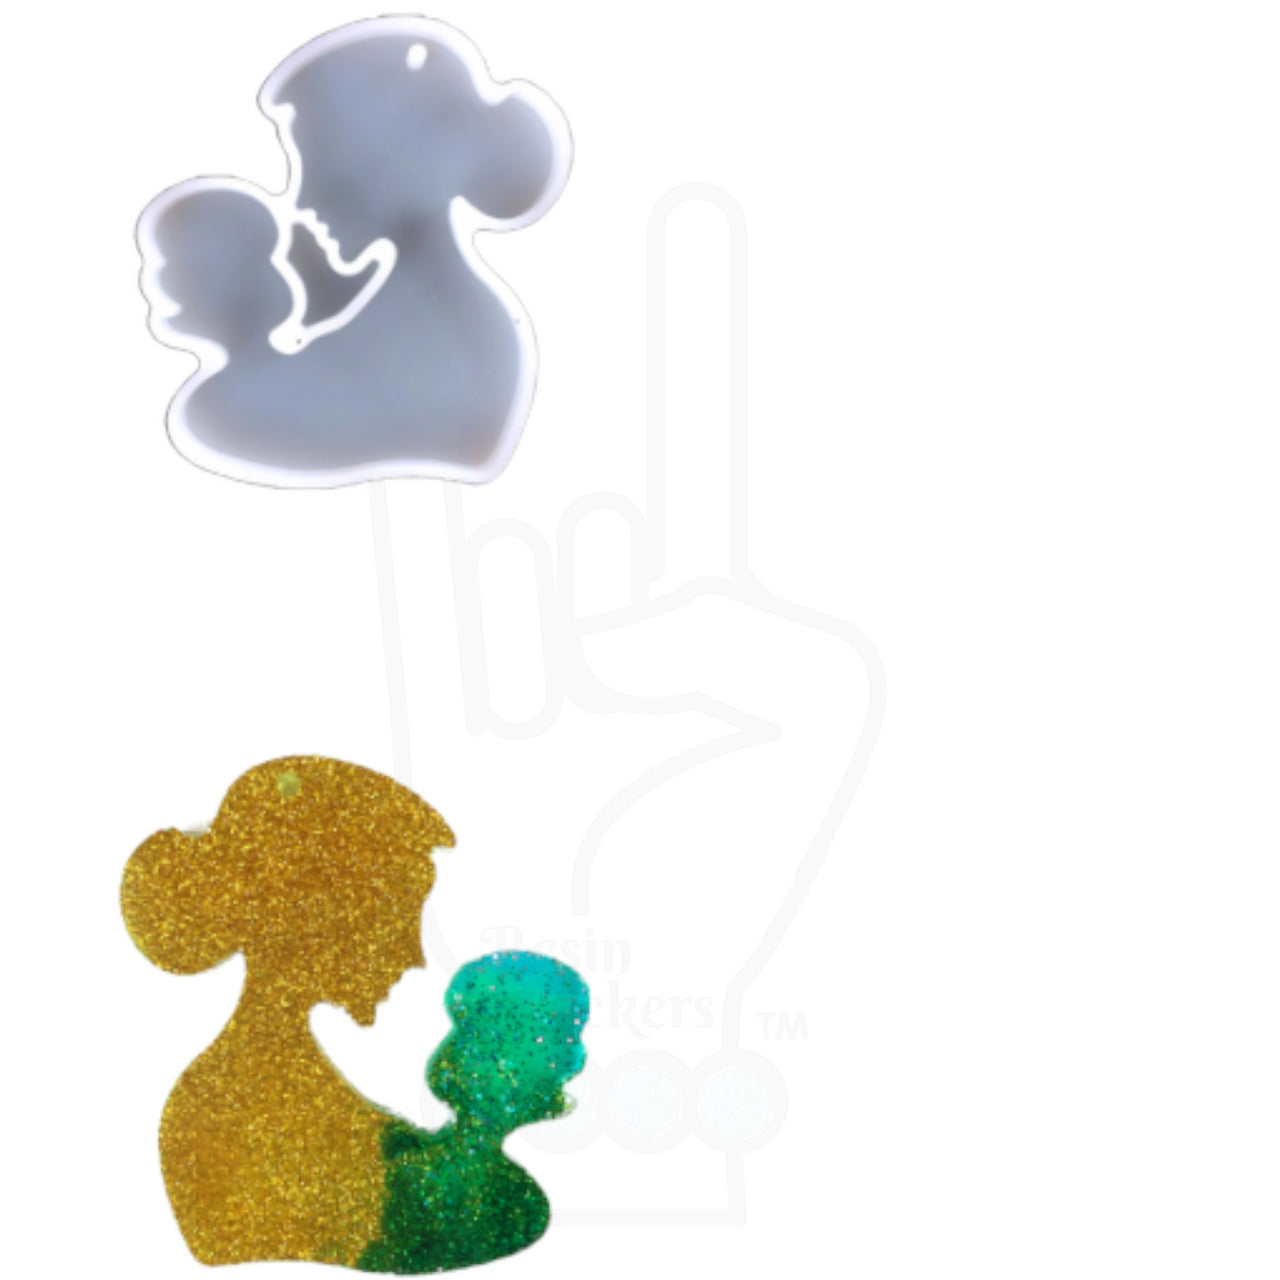 Mother and Baby Silhouette Keychain Mold for UV or Epoxy Resin Art